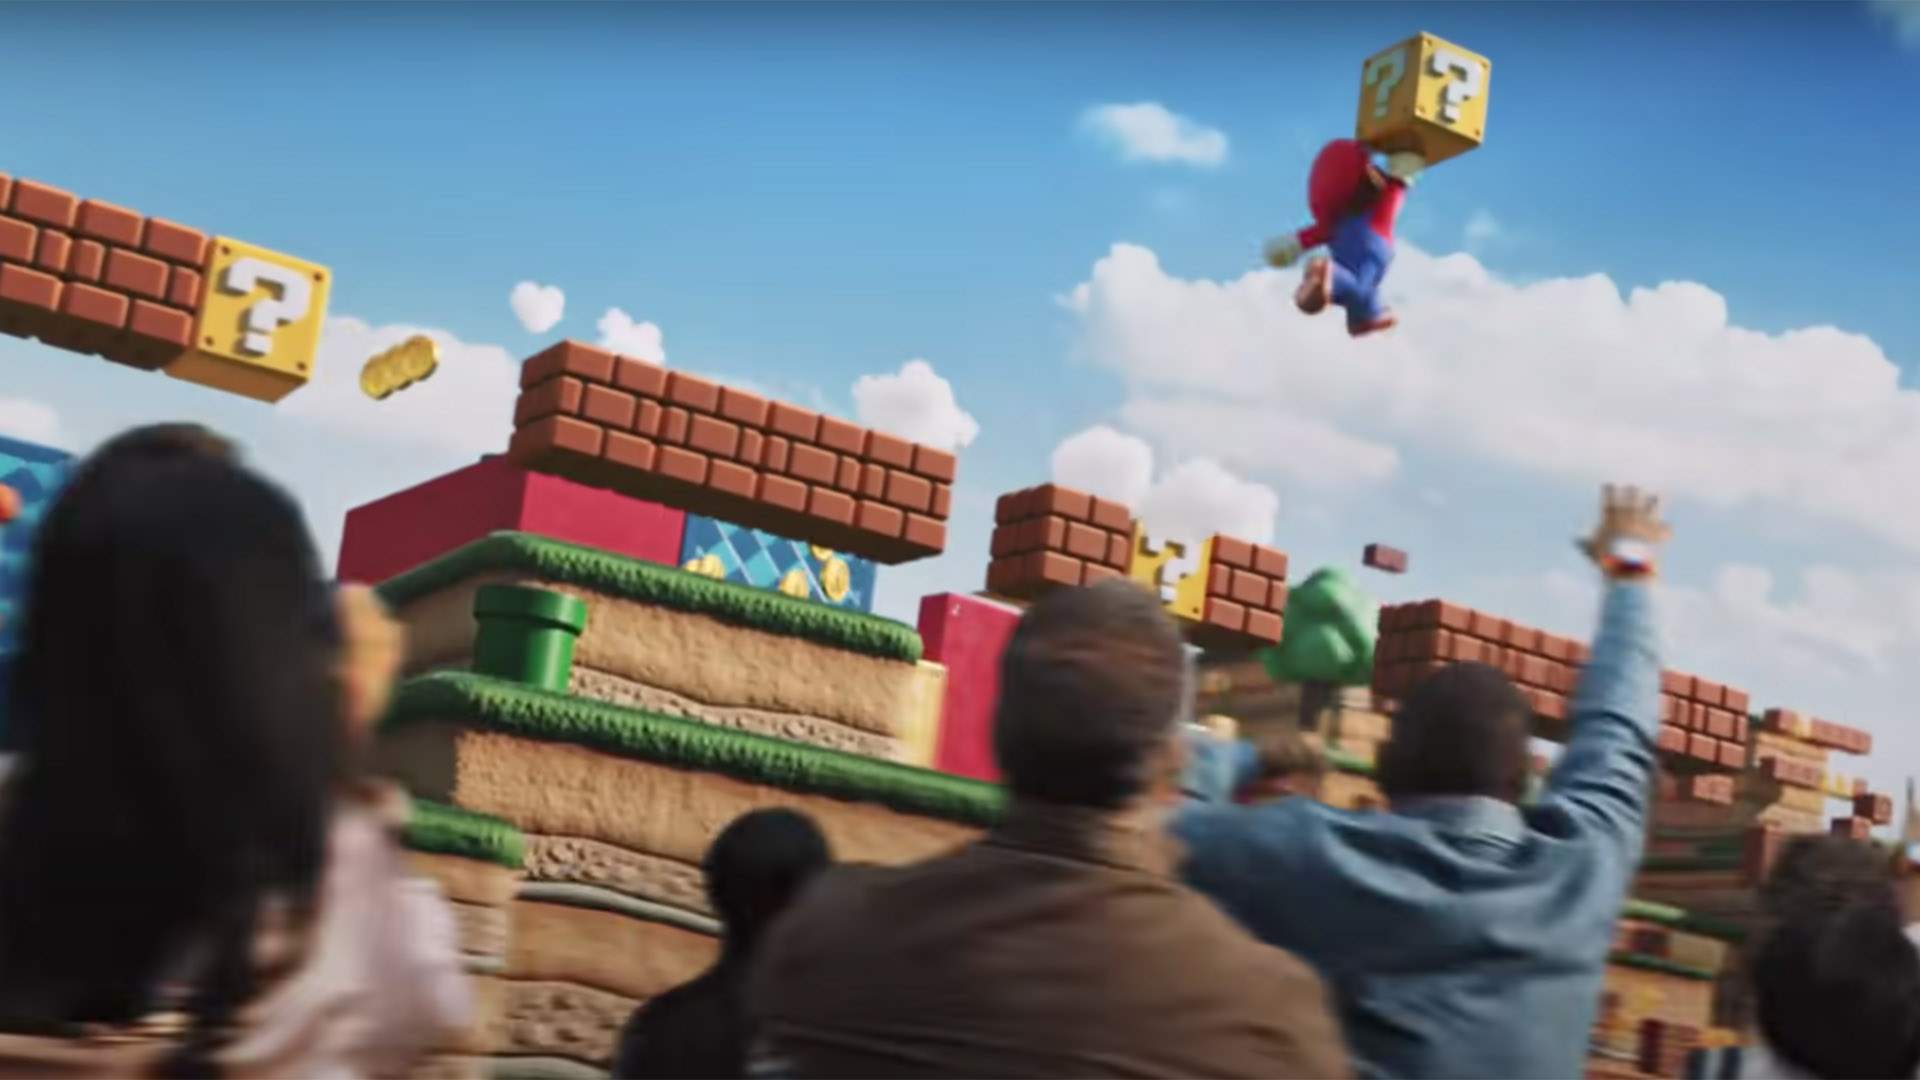 Japan's Multi-Level Super Nintendo Theme Park (and Its 'Mario Kart' Ride) Will Now Open in Early 2021